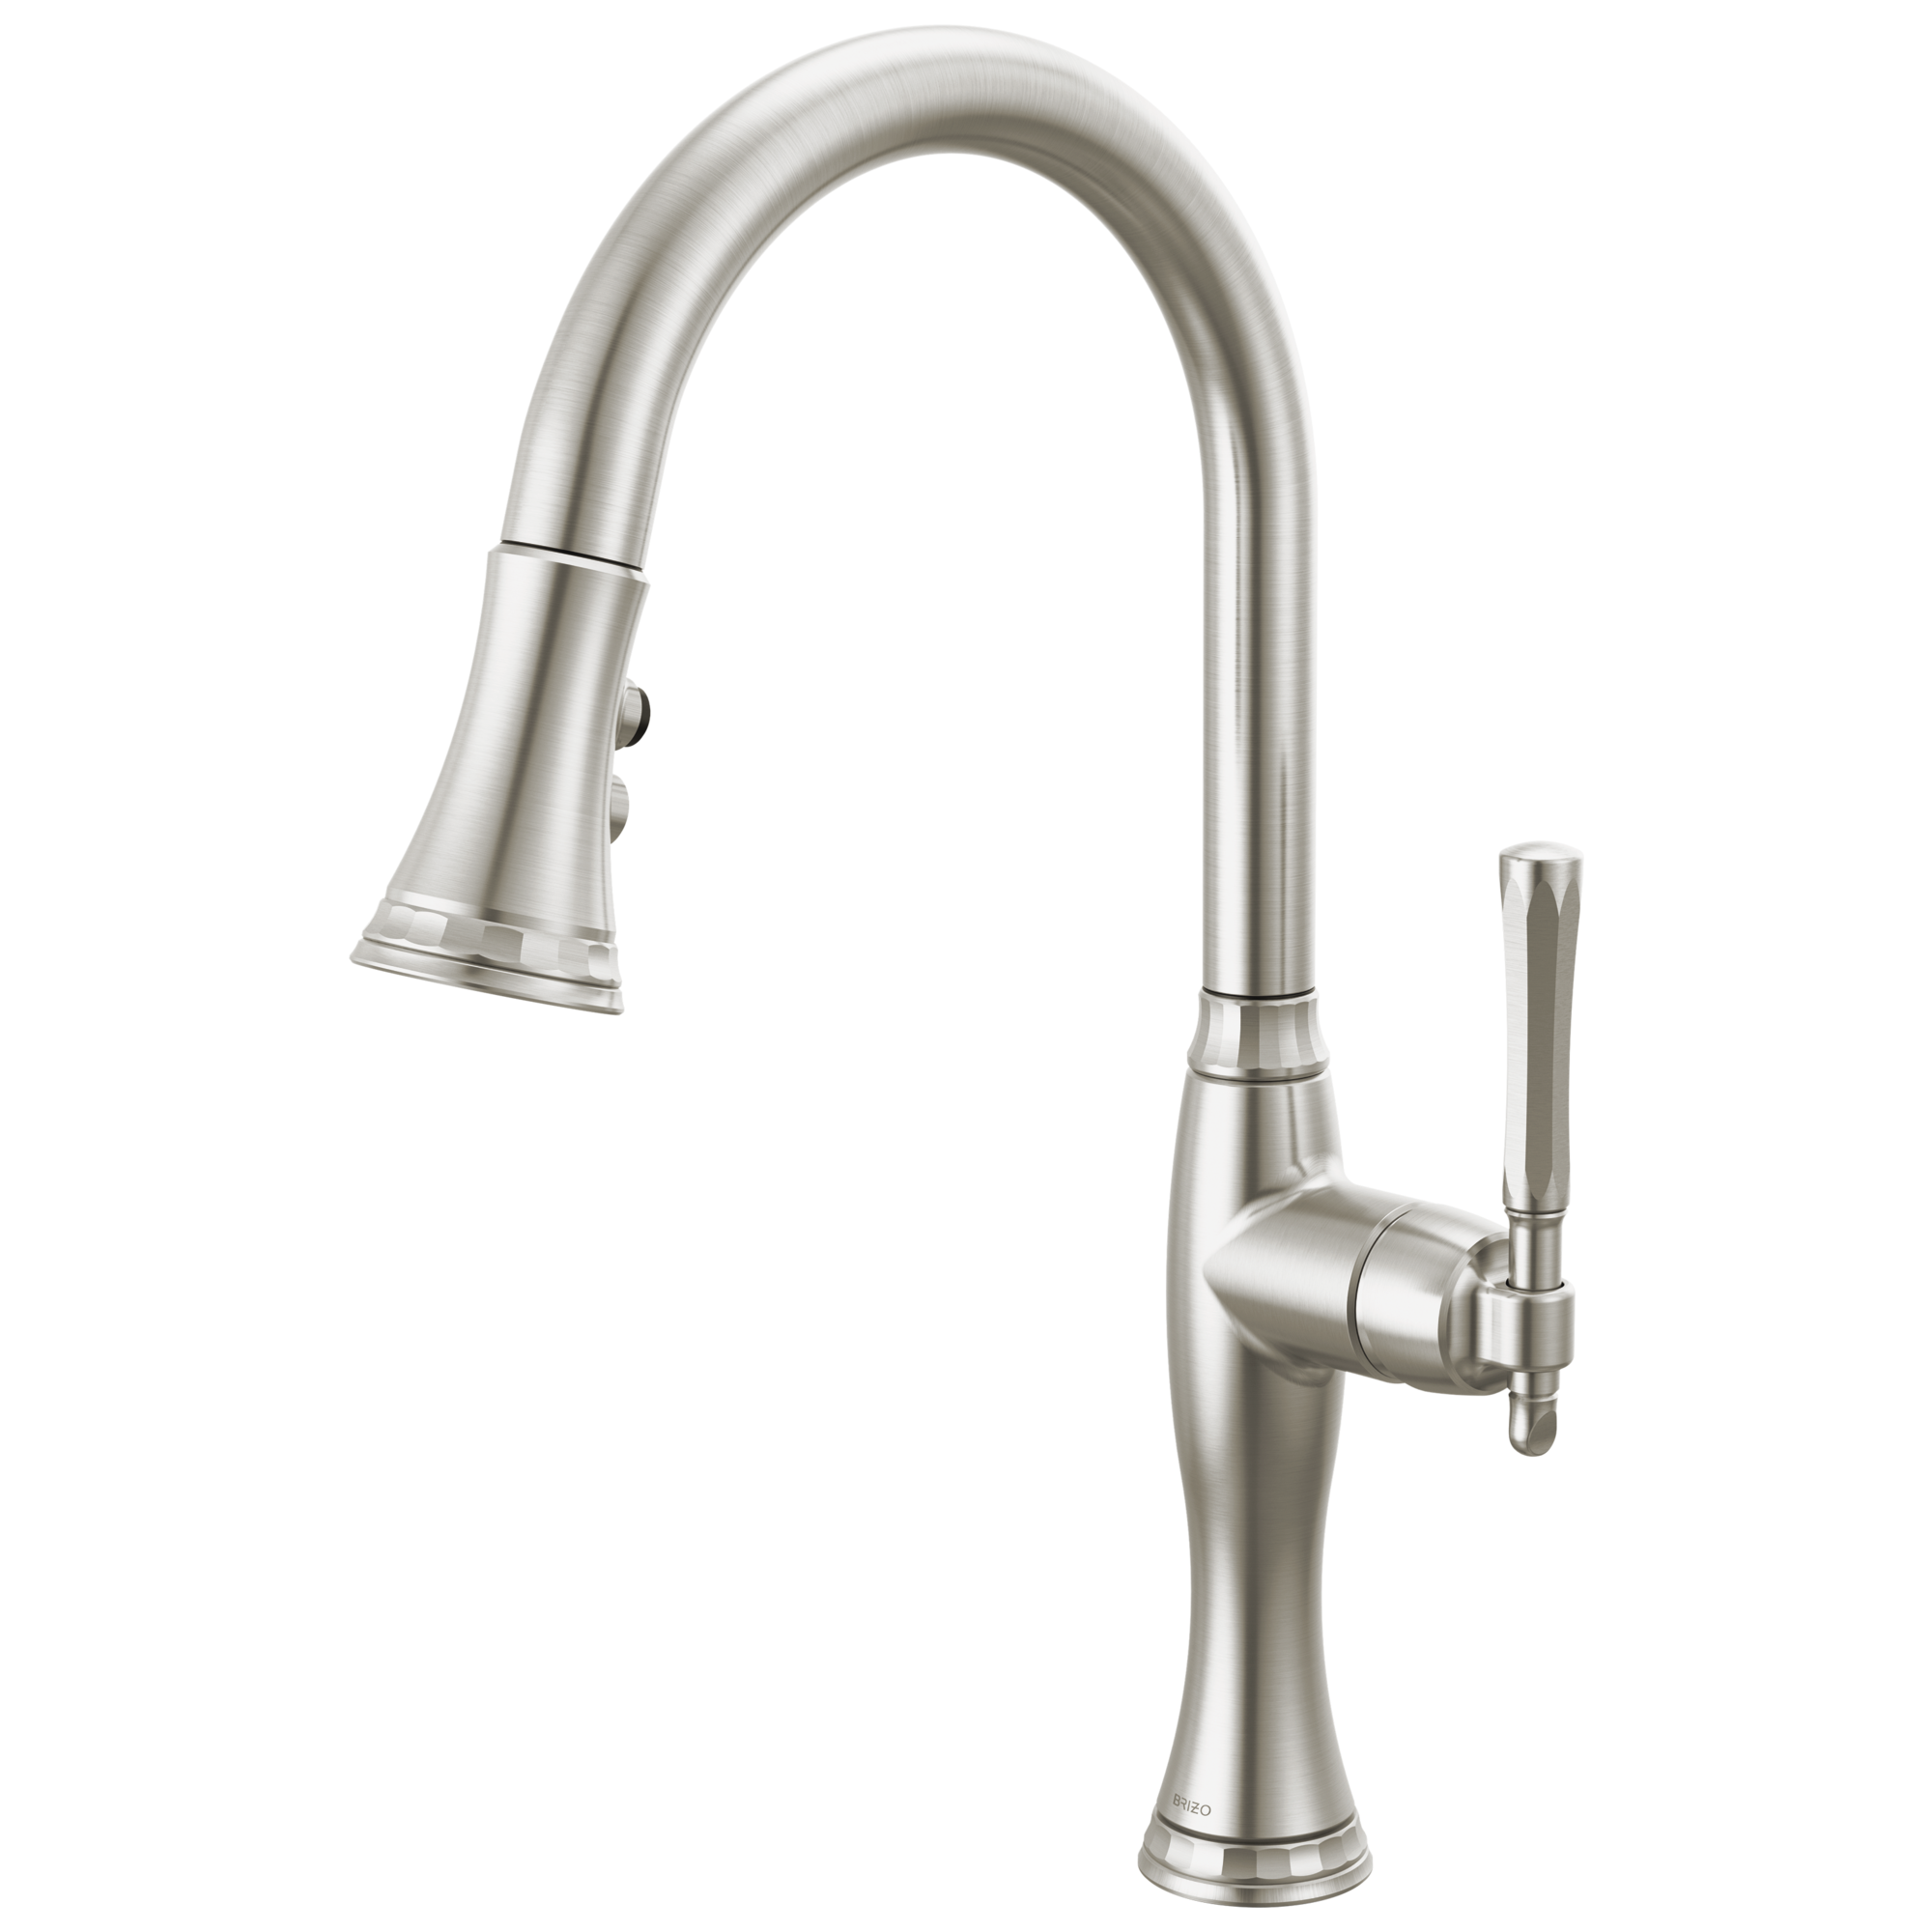 Brizo The Tulham Kitchen Collection by Brizo Pull-Down Kitchen Faucet